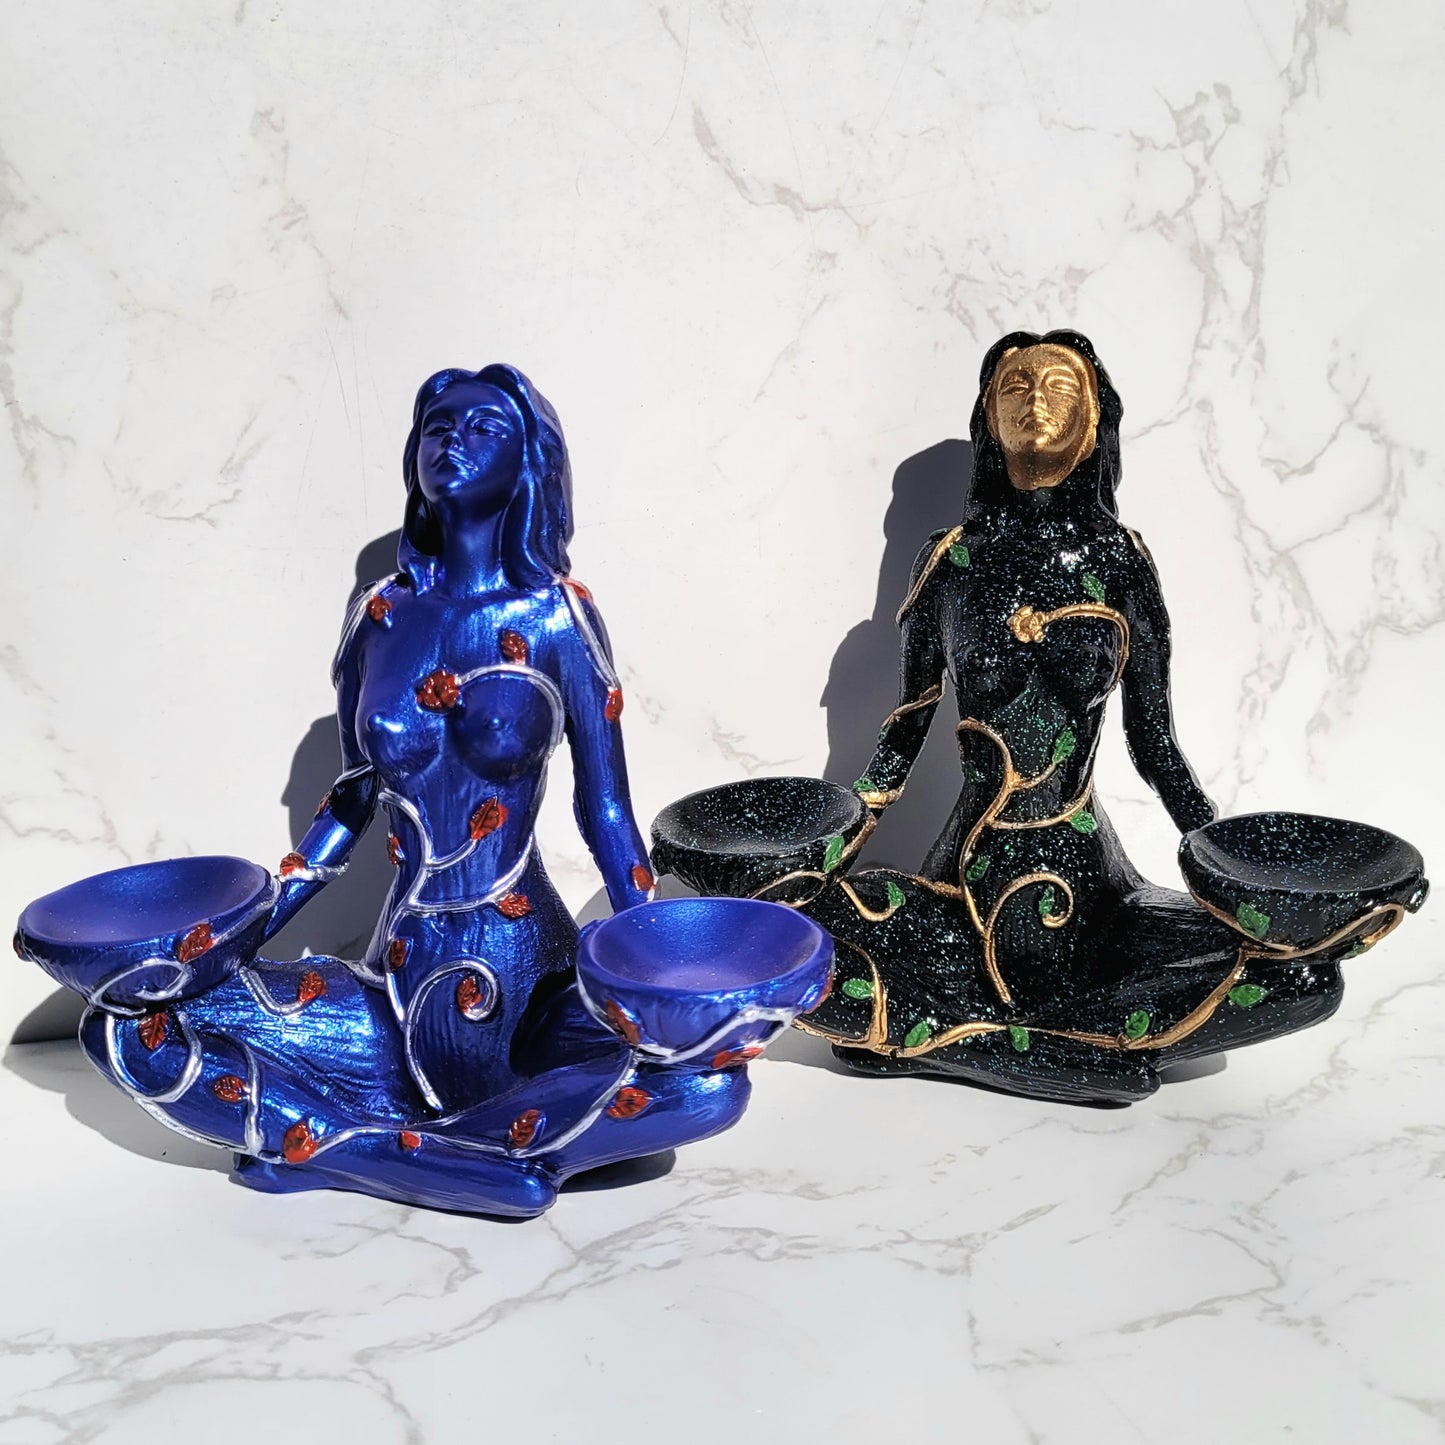 Goddess Two Sphere Display Stand in Blue or Black Sparkle, For Crystal Balls from 1" to 2.4" (25mm to 60mm)